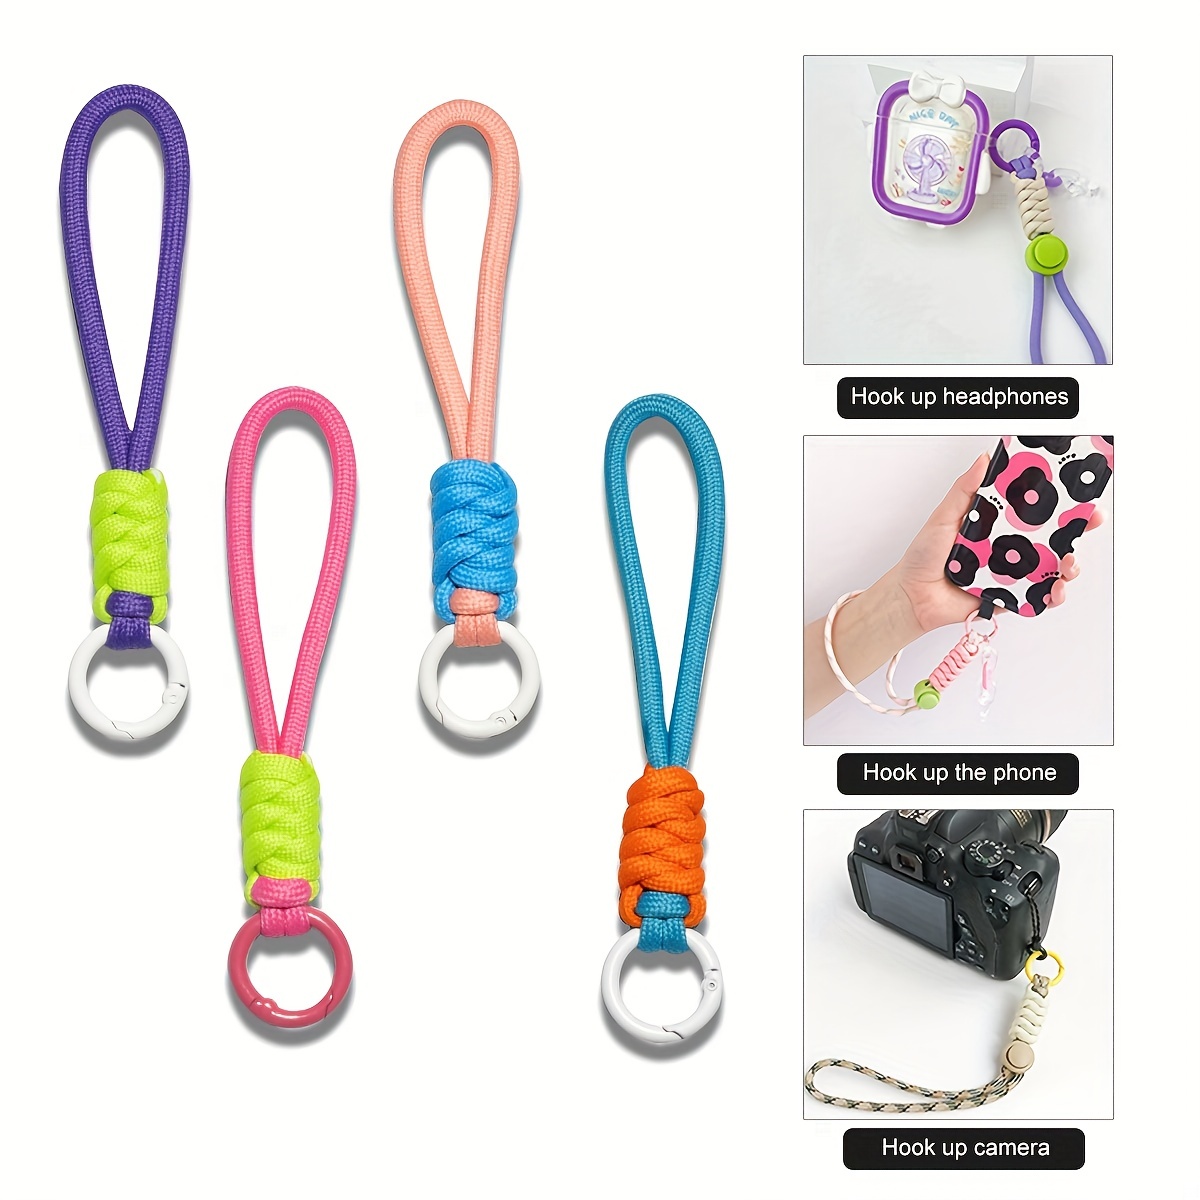 Short Lanyard with Carabiner, Embroidered patches manufacturer